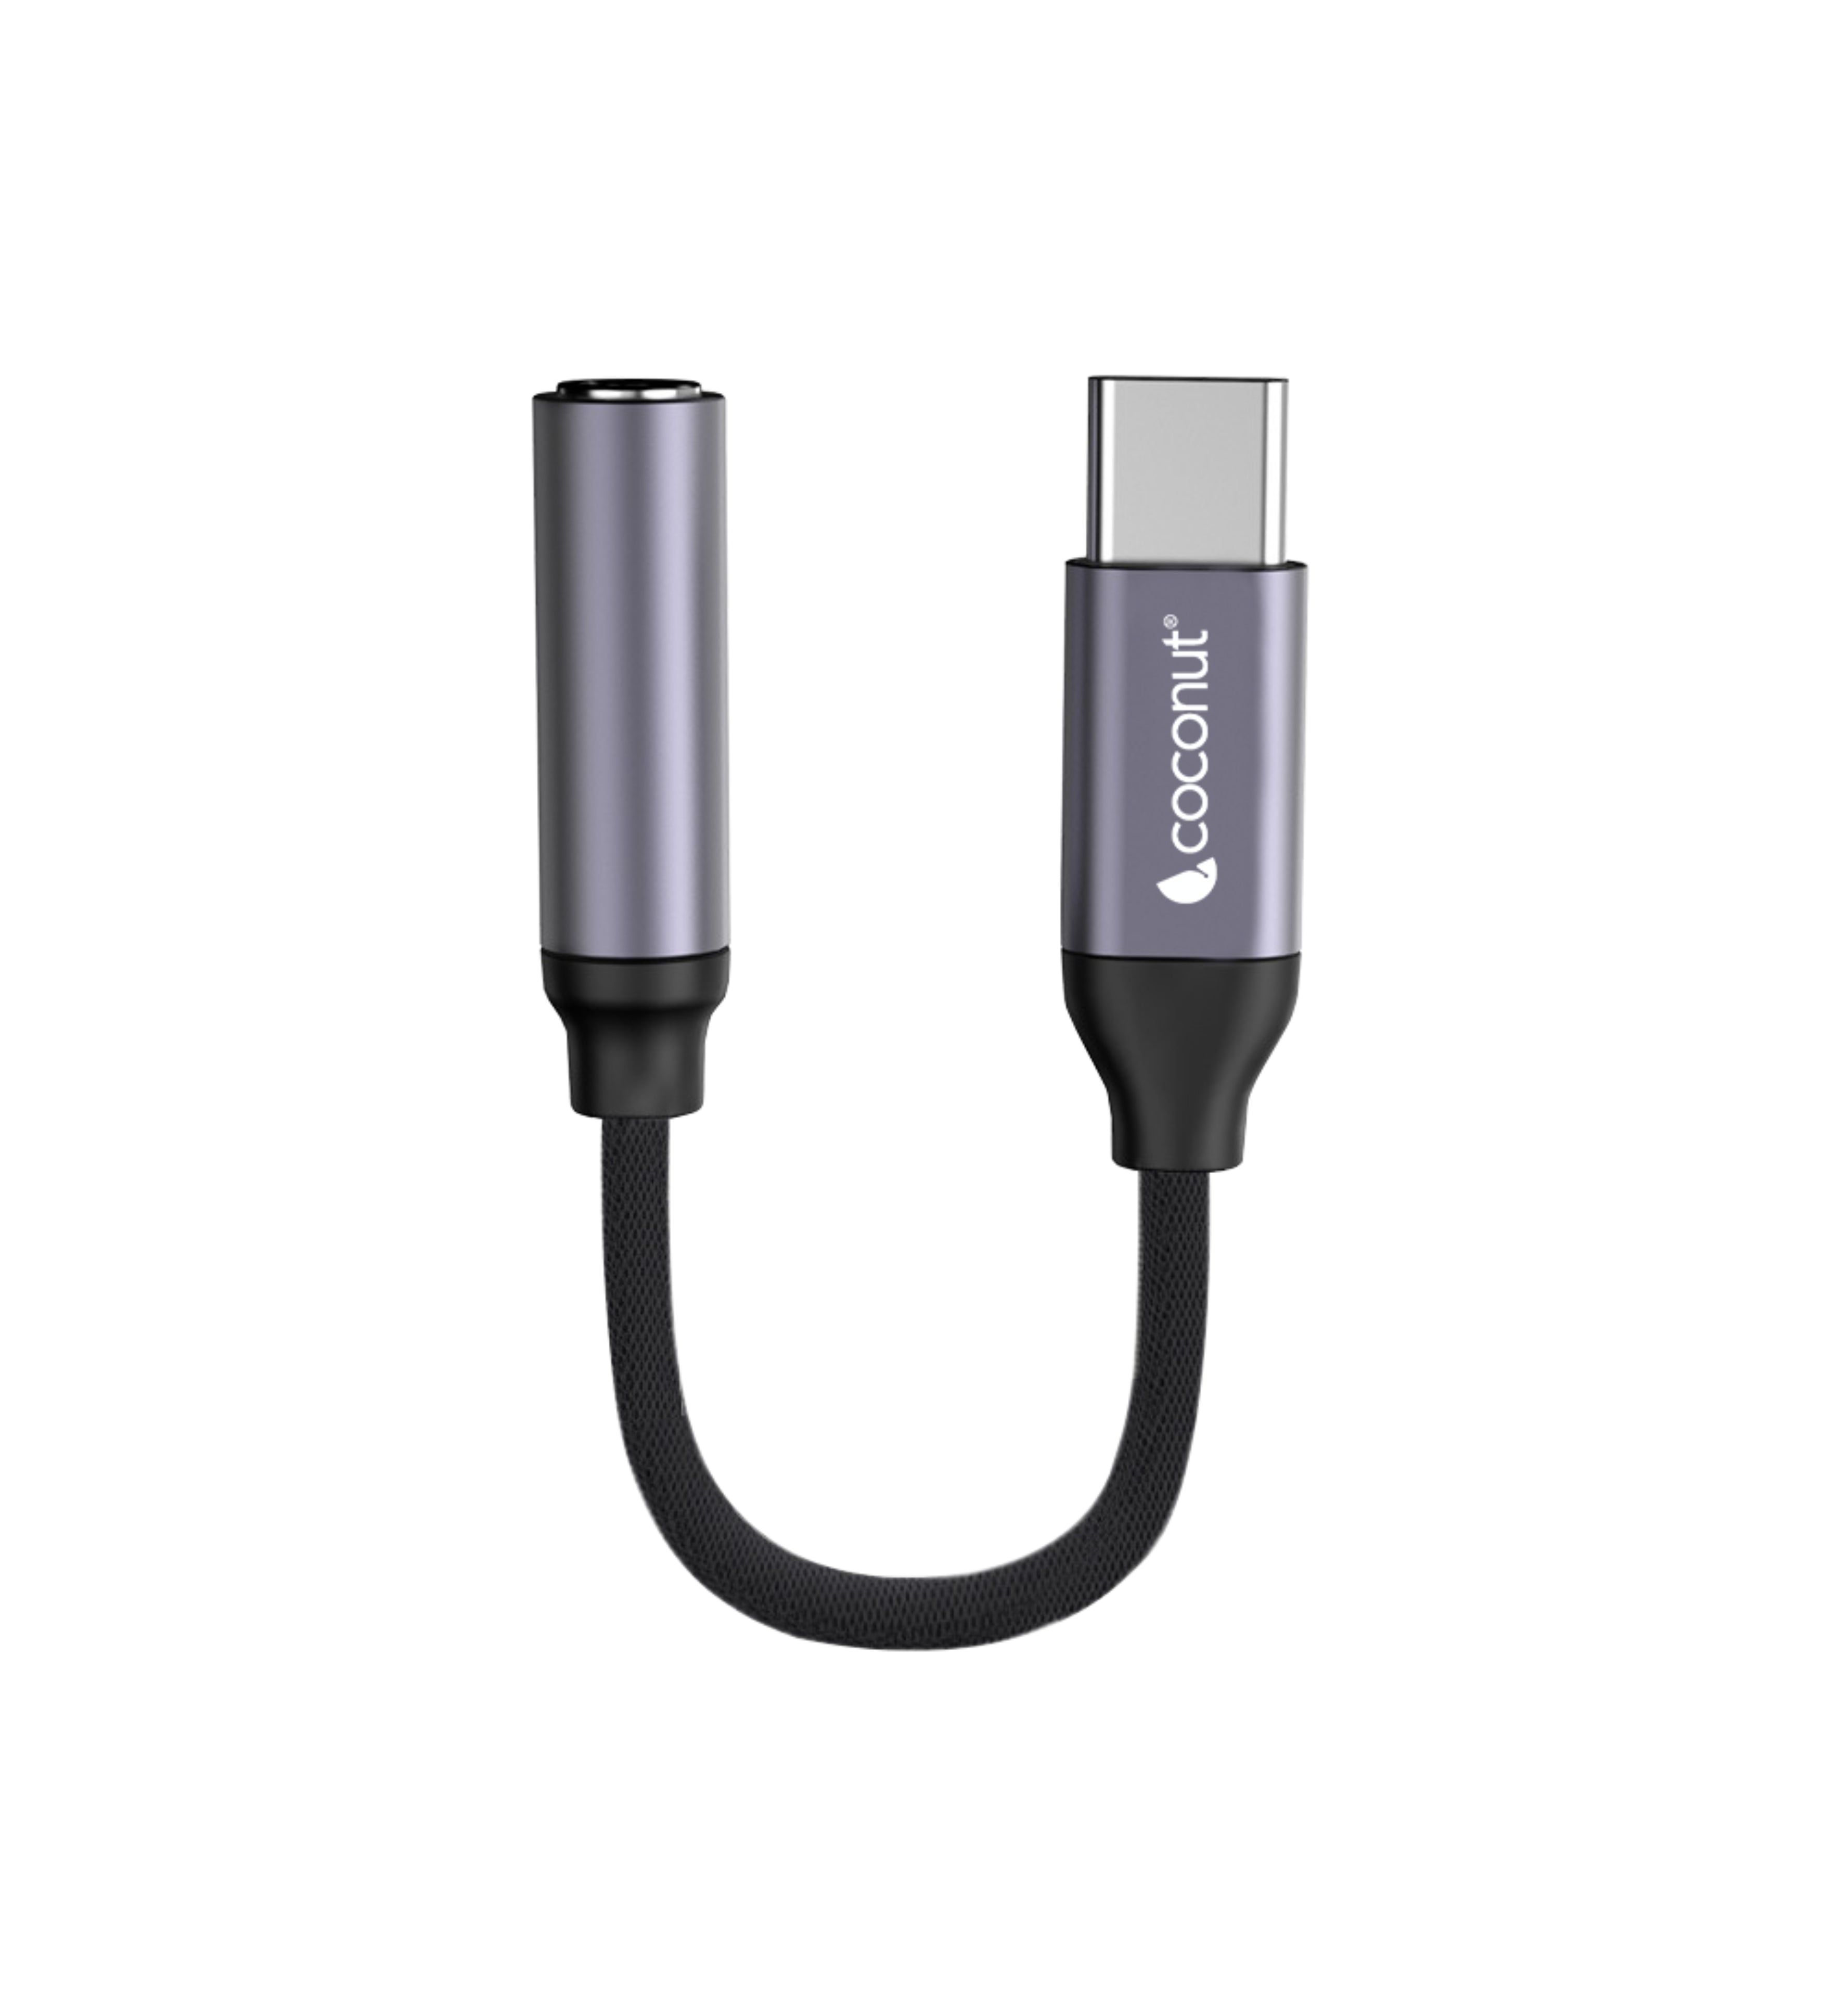 AC01 USB Type C to 3.5mm Adapter